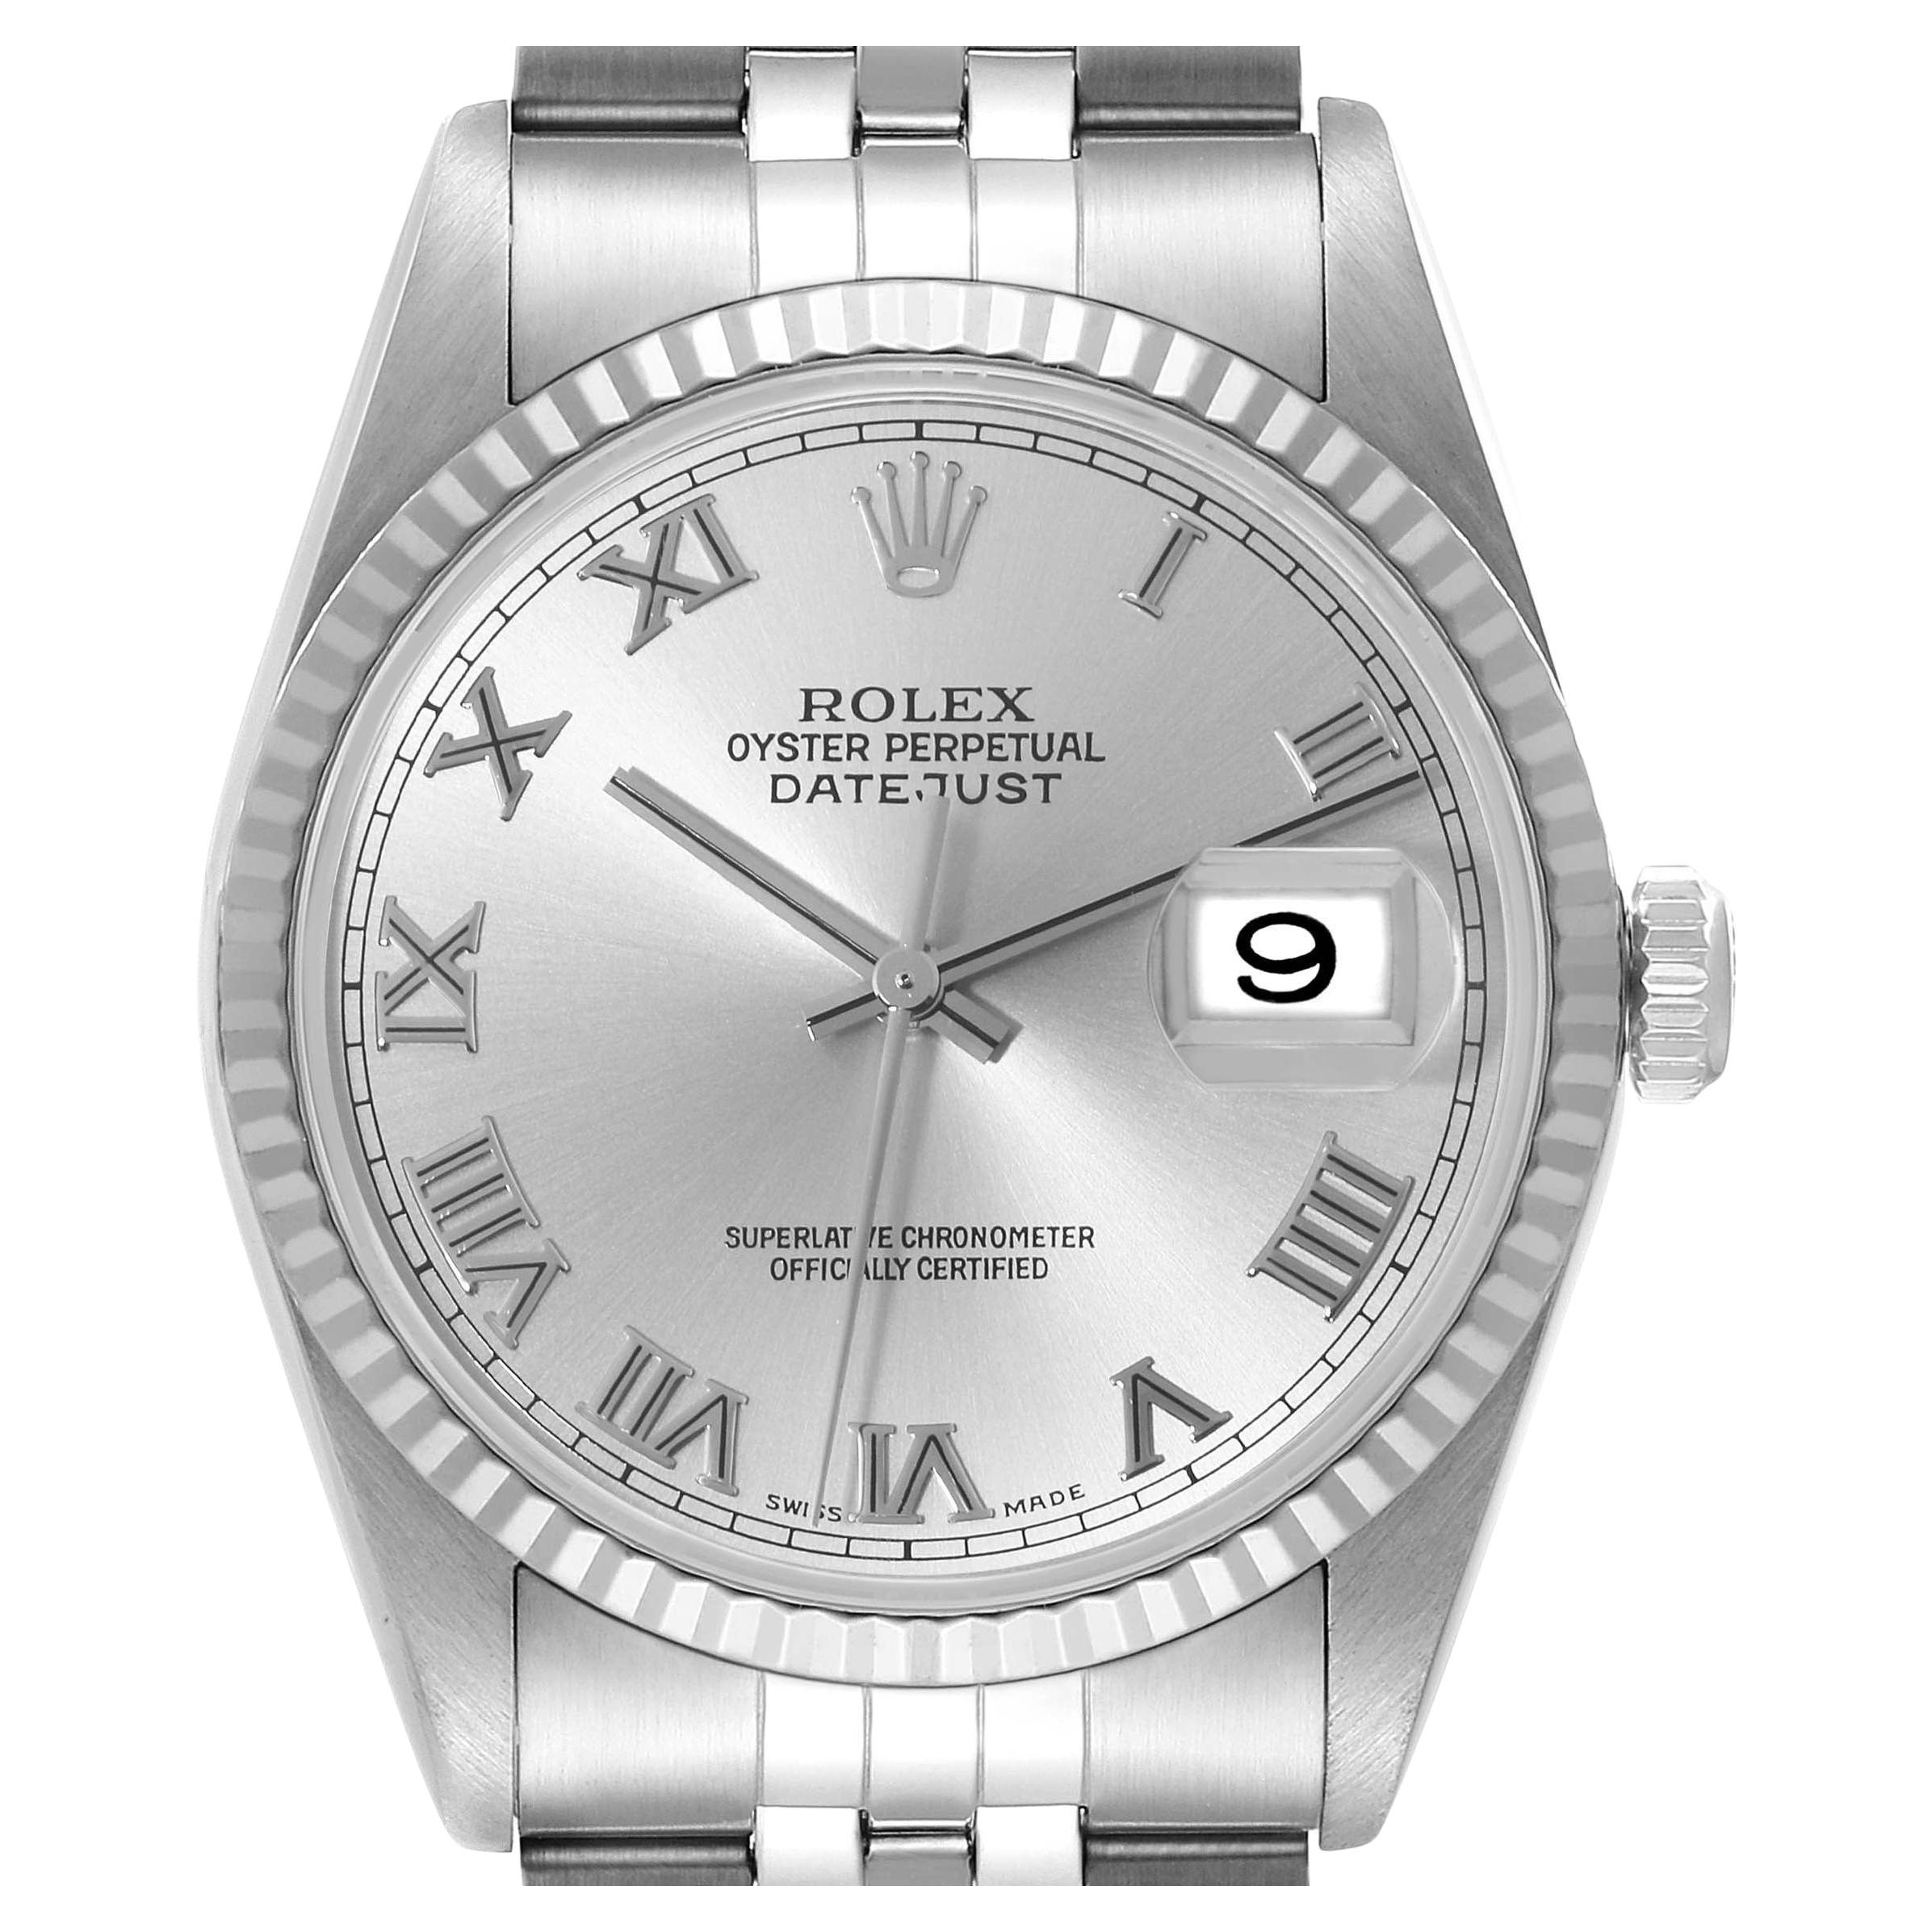 Rolex Datejust 36 Steel White Gold Silver Roman Dial Mens Watch 16234 Box Papers